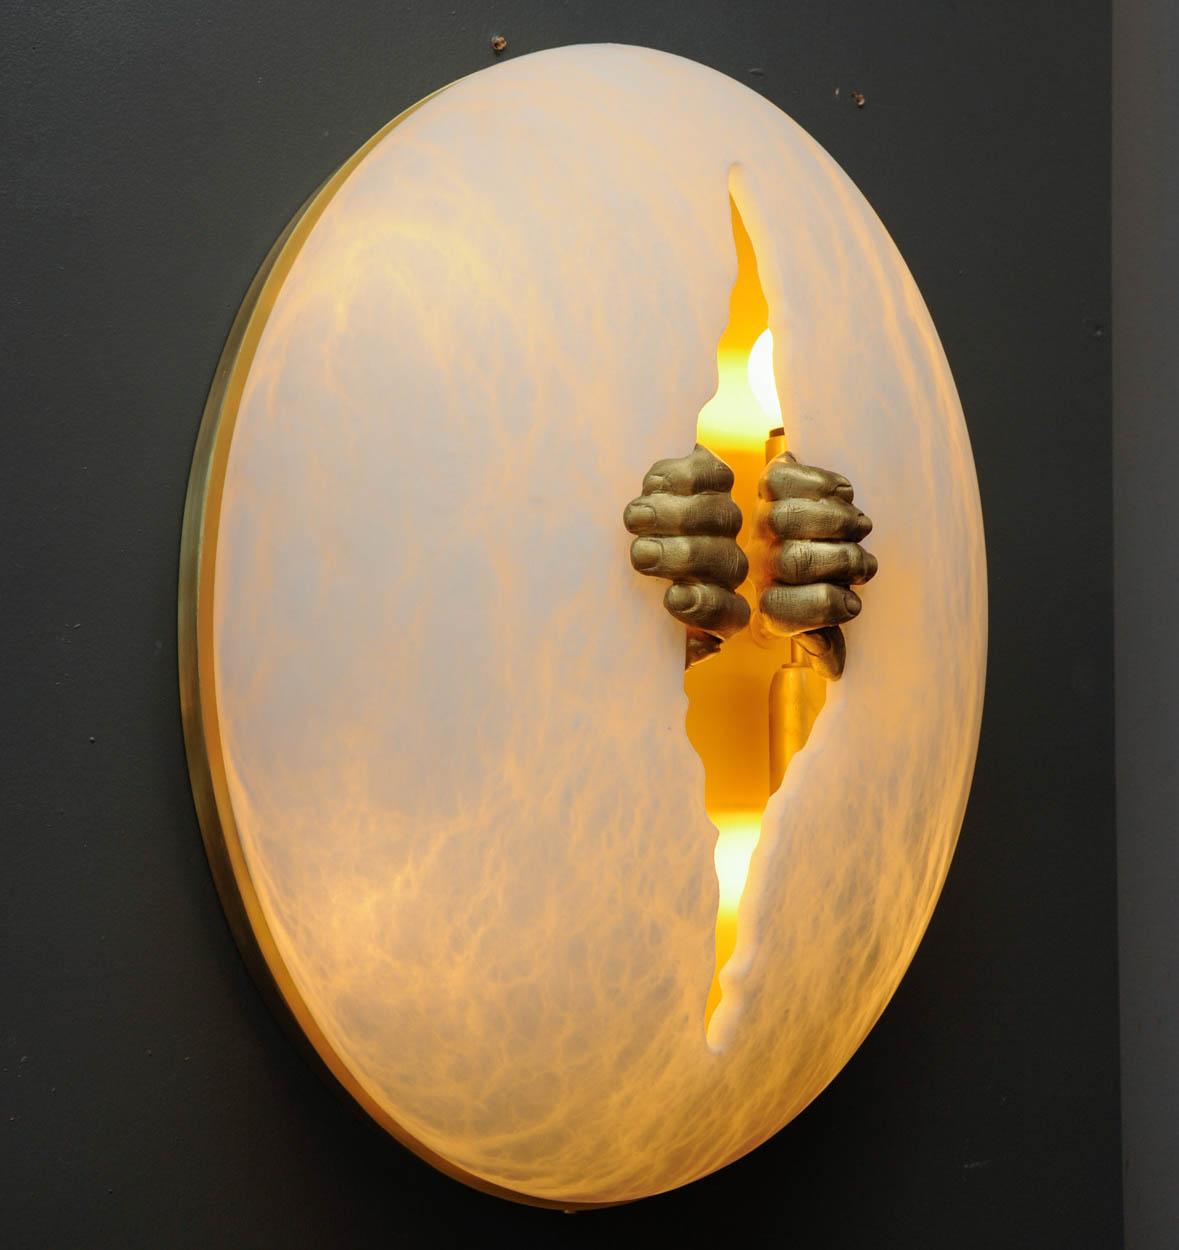 New exclusive design by Glustin Luminaires, egg shaped alabaster sconce with a crack carved in the middle spread by a pair of brass hands. Satin brass plate on the back.
Two lights inside the sconce.